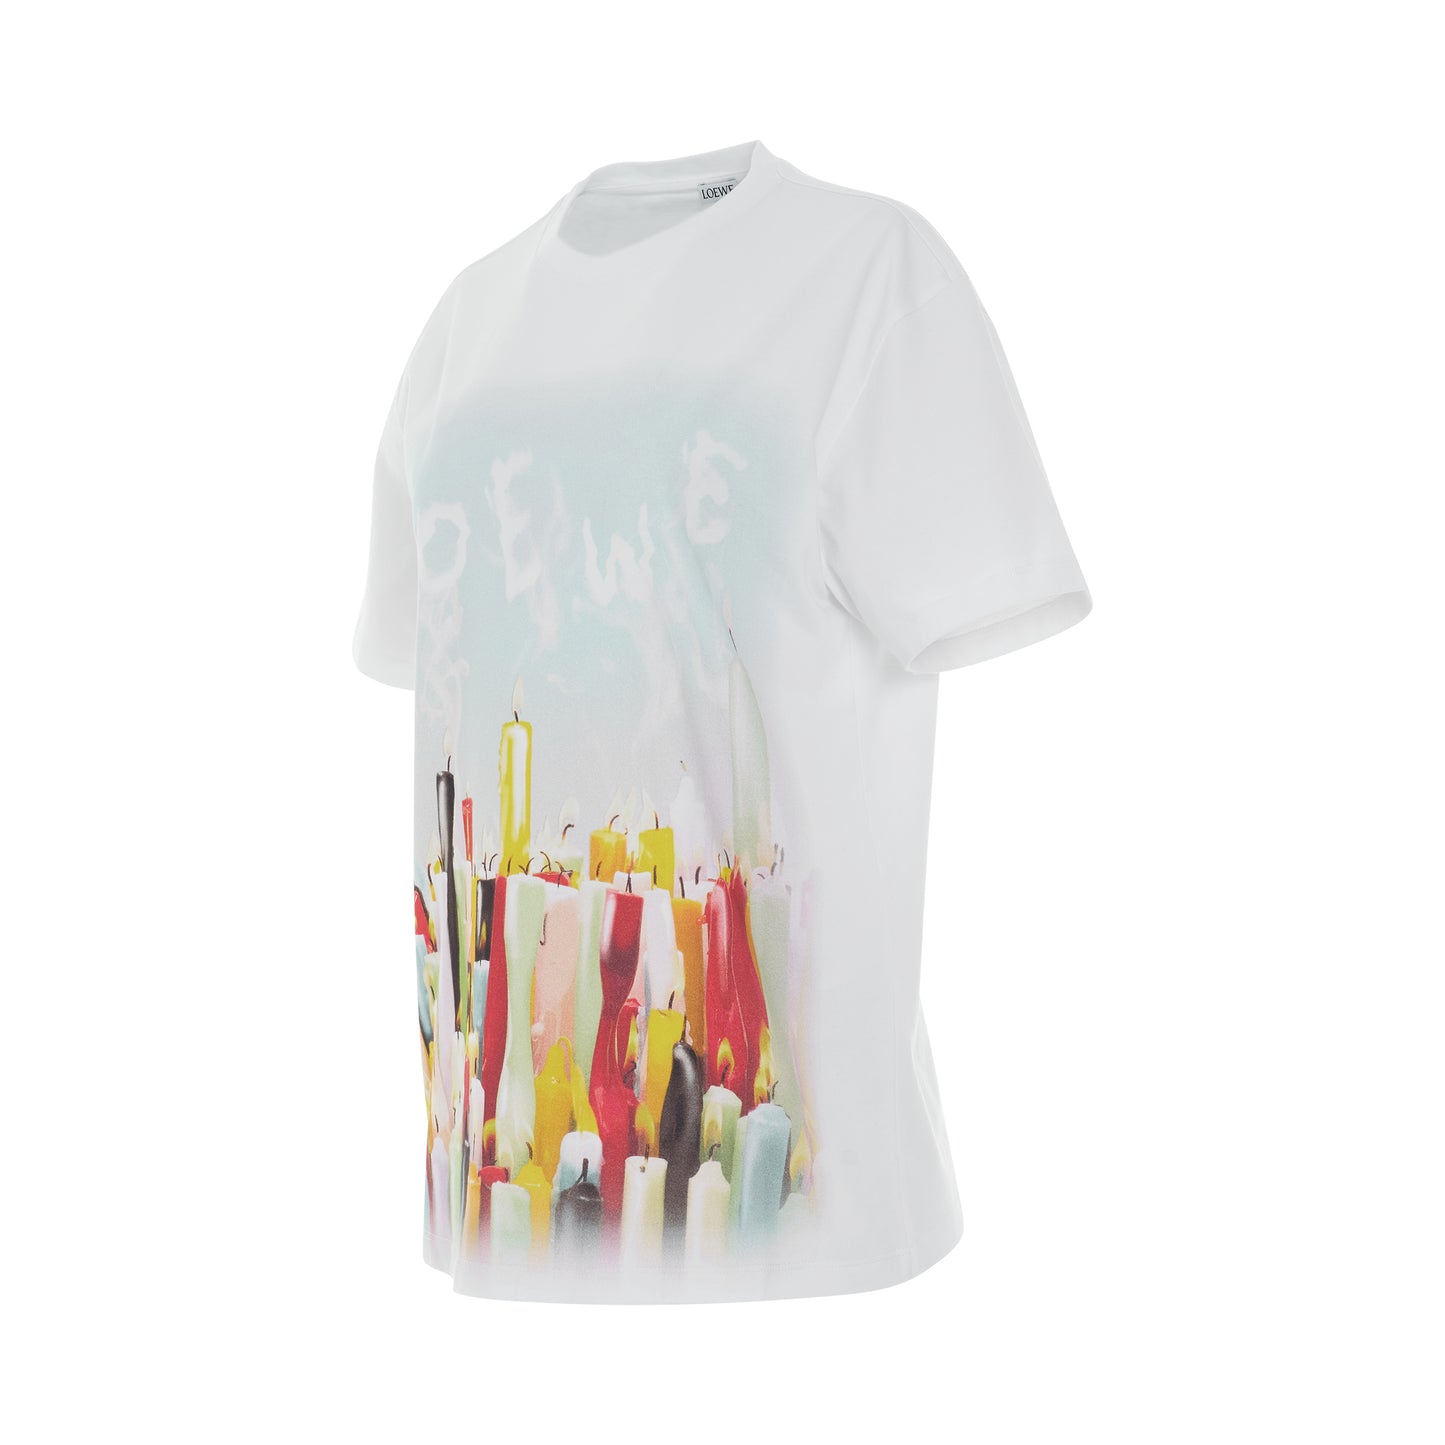 Candles T-Shirt in Multicolor